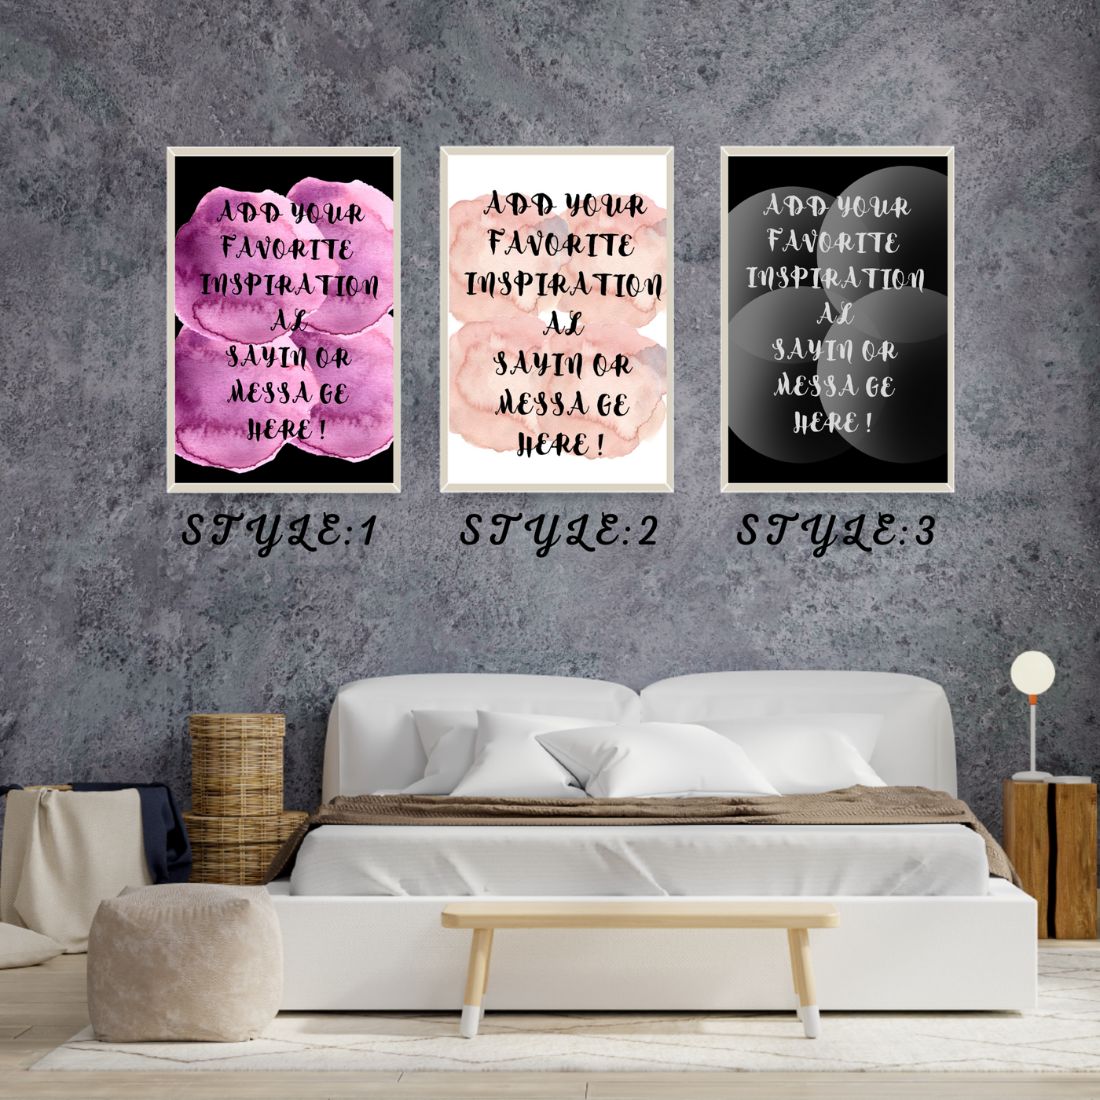 Motivational Quote Wall Art" "Words of Wisdom: Elegant Quote Wall Art Decor" "Positive Vibes Only: Stylish Quote Wall Art Collection" "Dream Big, Live Bold: Modern Typography Quote Wall Art" "Artistic Affirmations: Creative Quote Wall Art Prints" preview image.